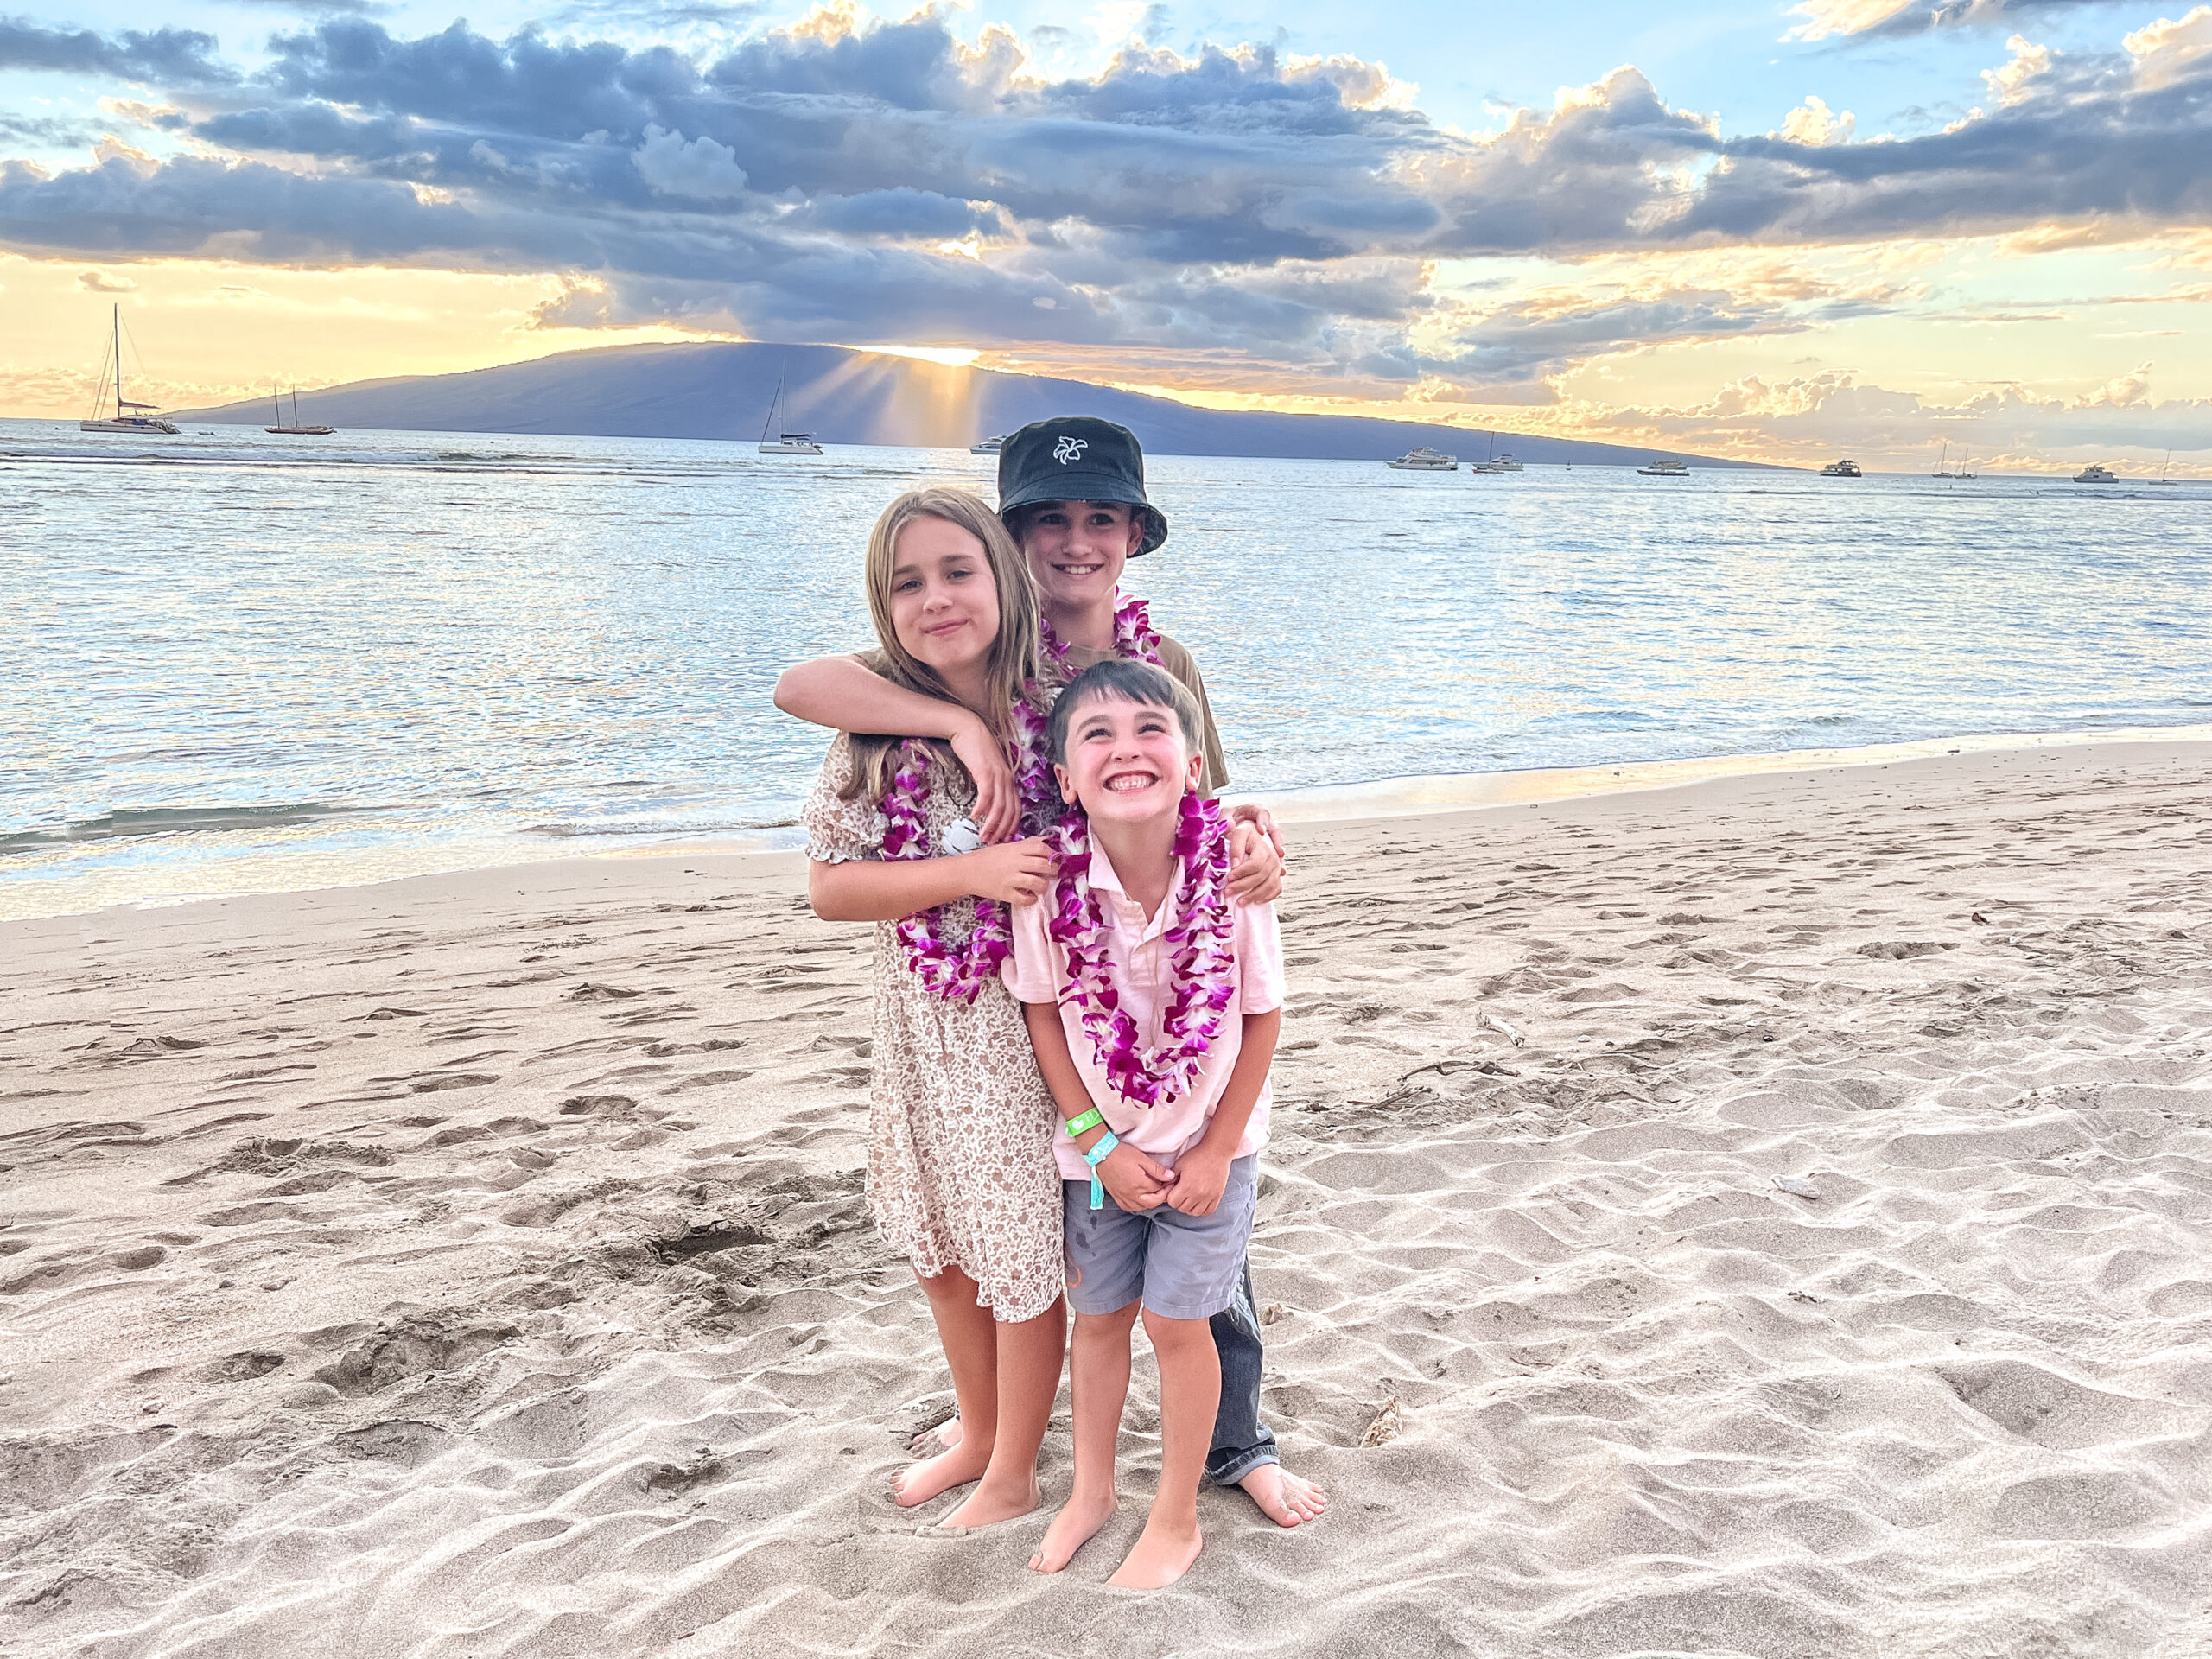 the three kiddos enjoying the sunset at the feast of lele #luau #visithawaii #thedldtravels